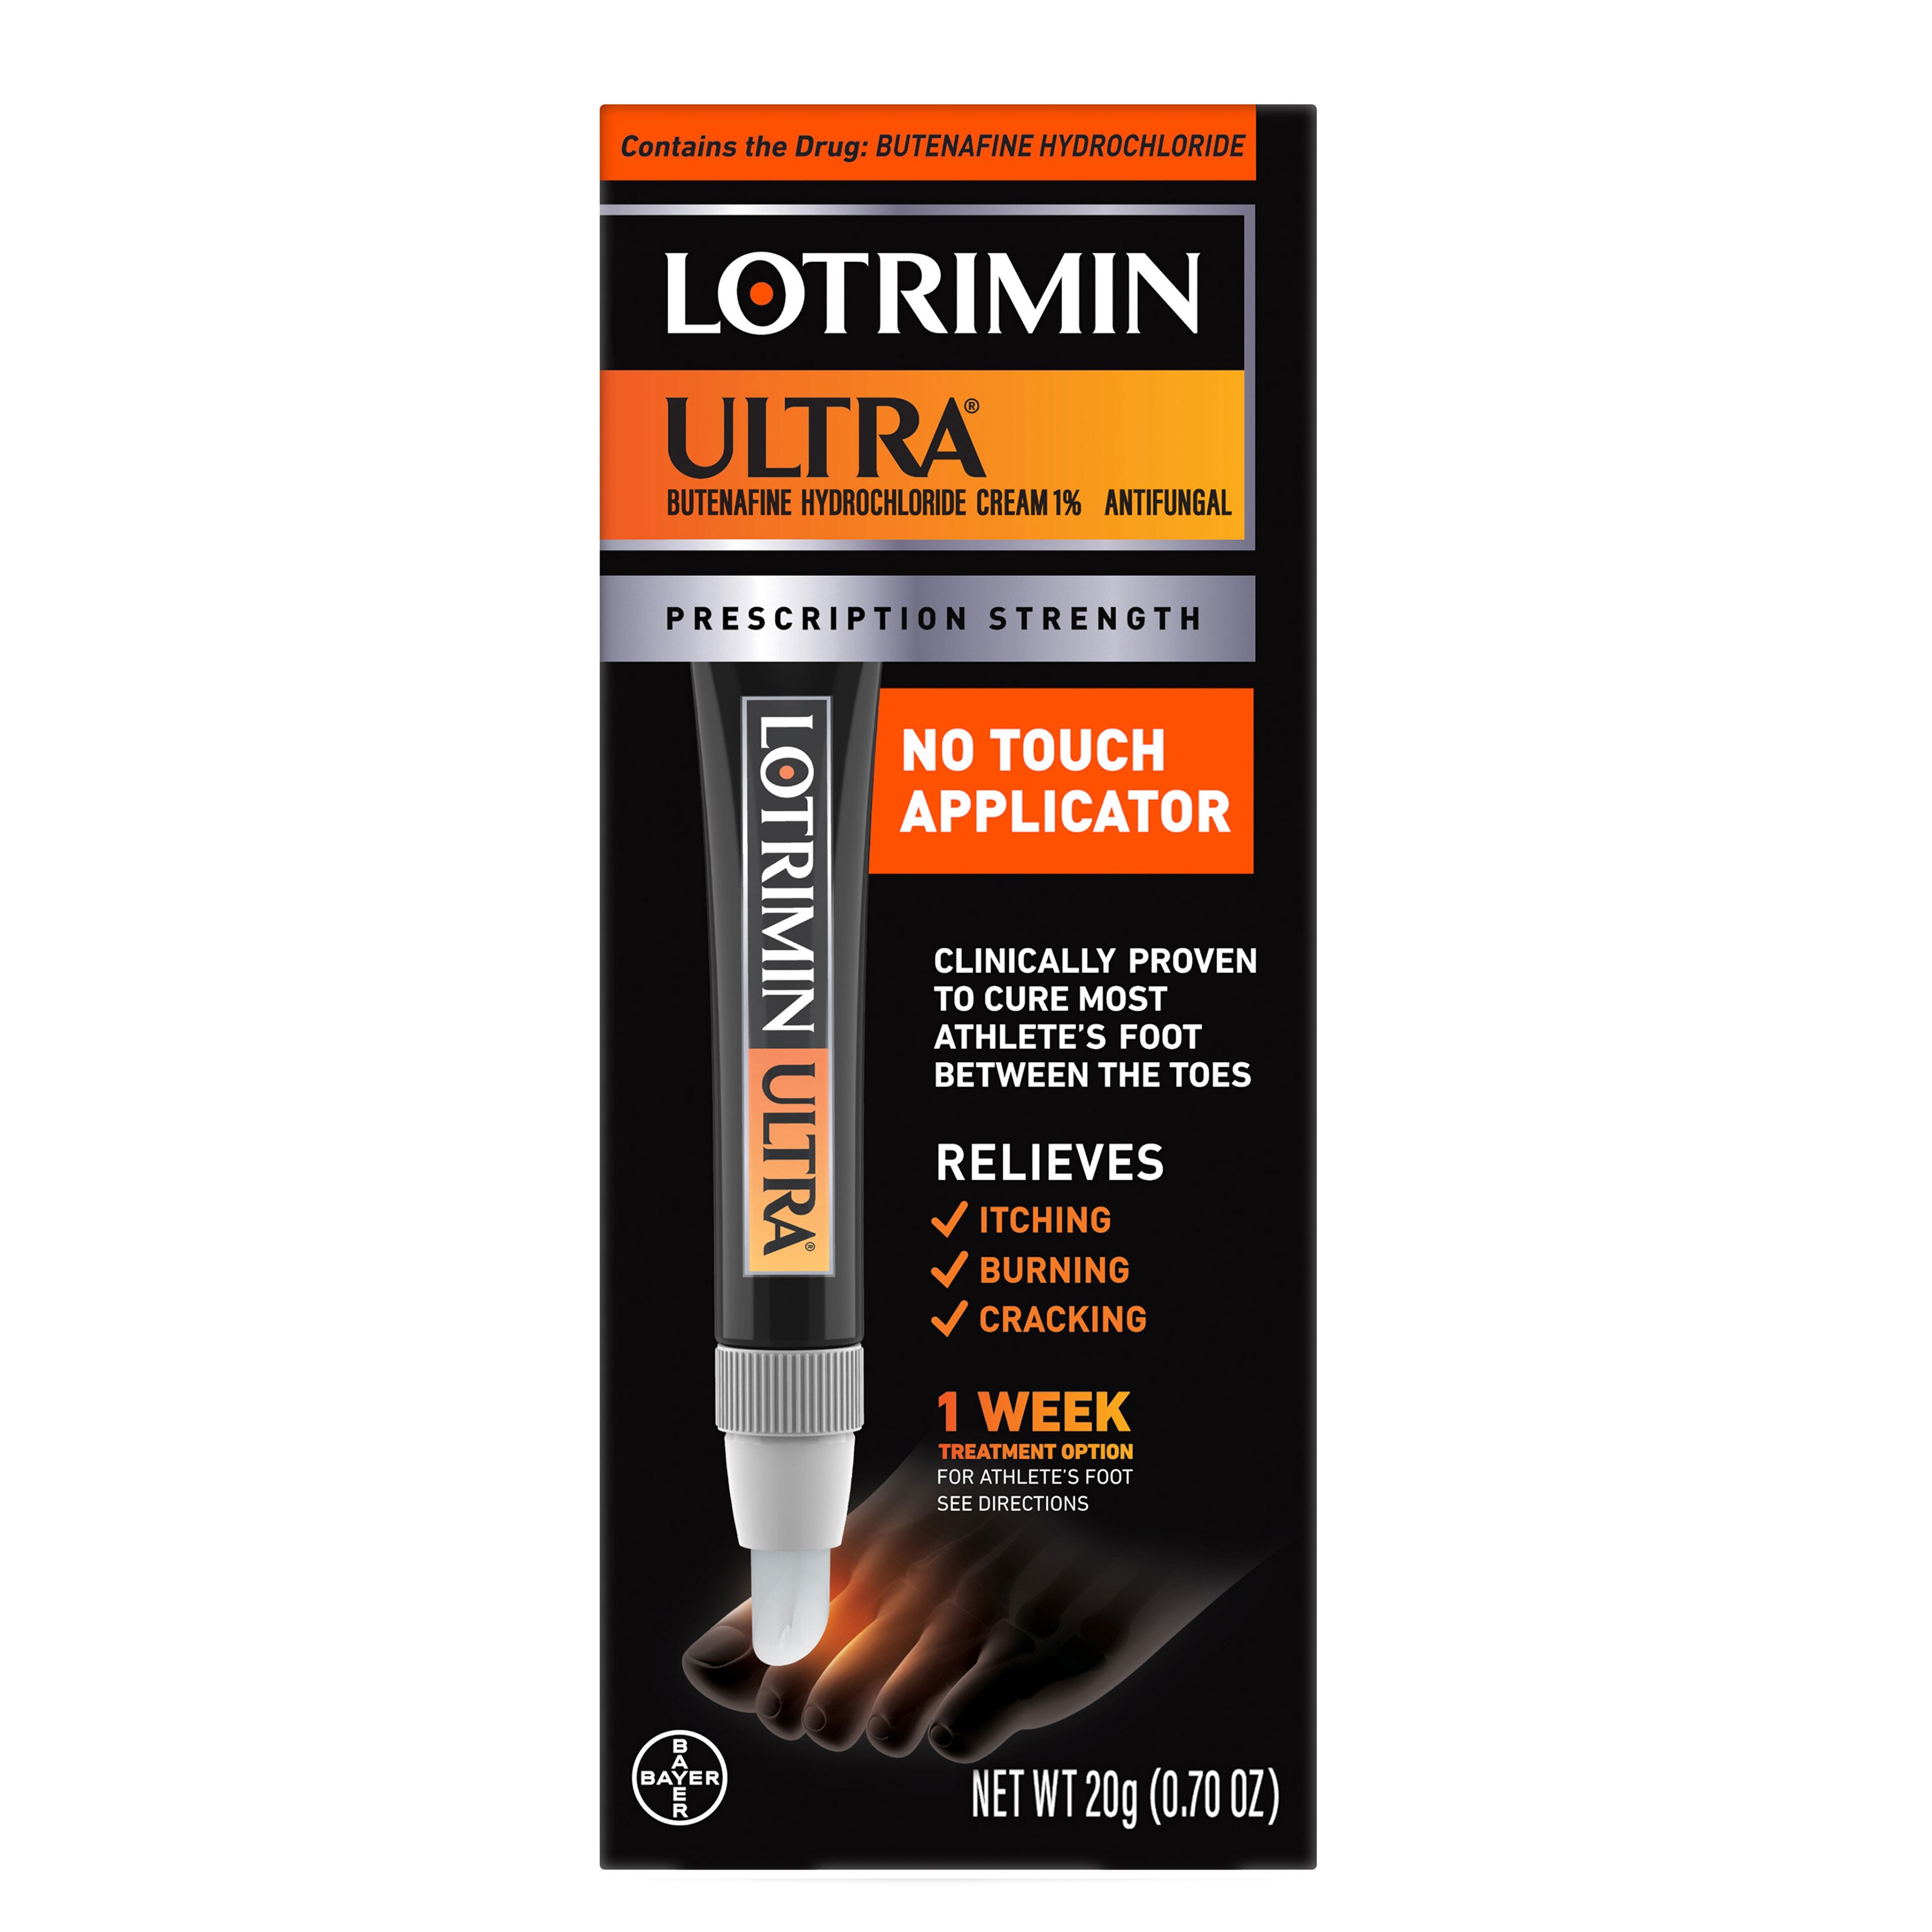 Lotrimin Ultra with No Touch Applicator, 1 Week Athlete's Foot Treatment Cream, 0.70 Oz